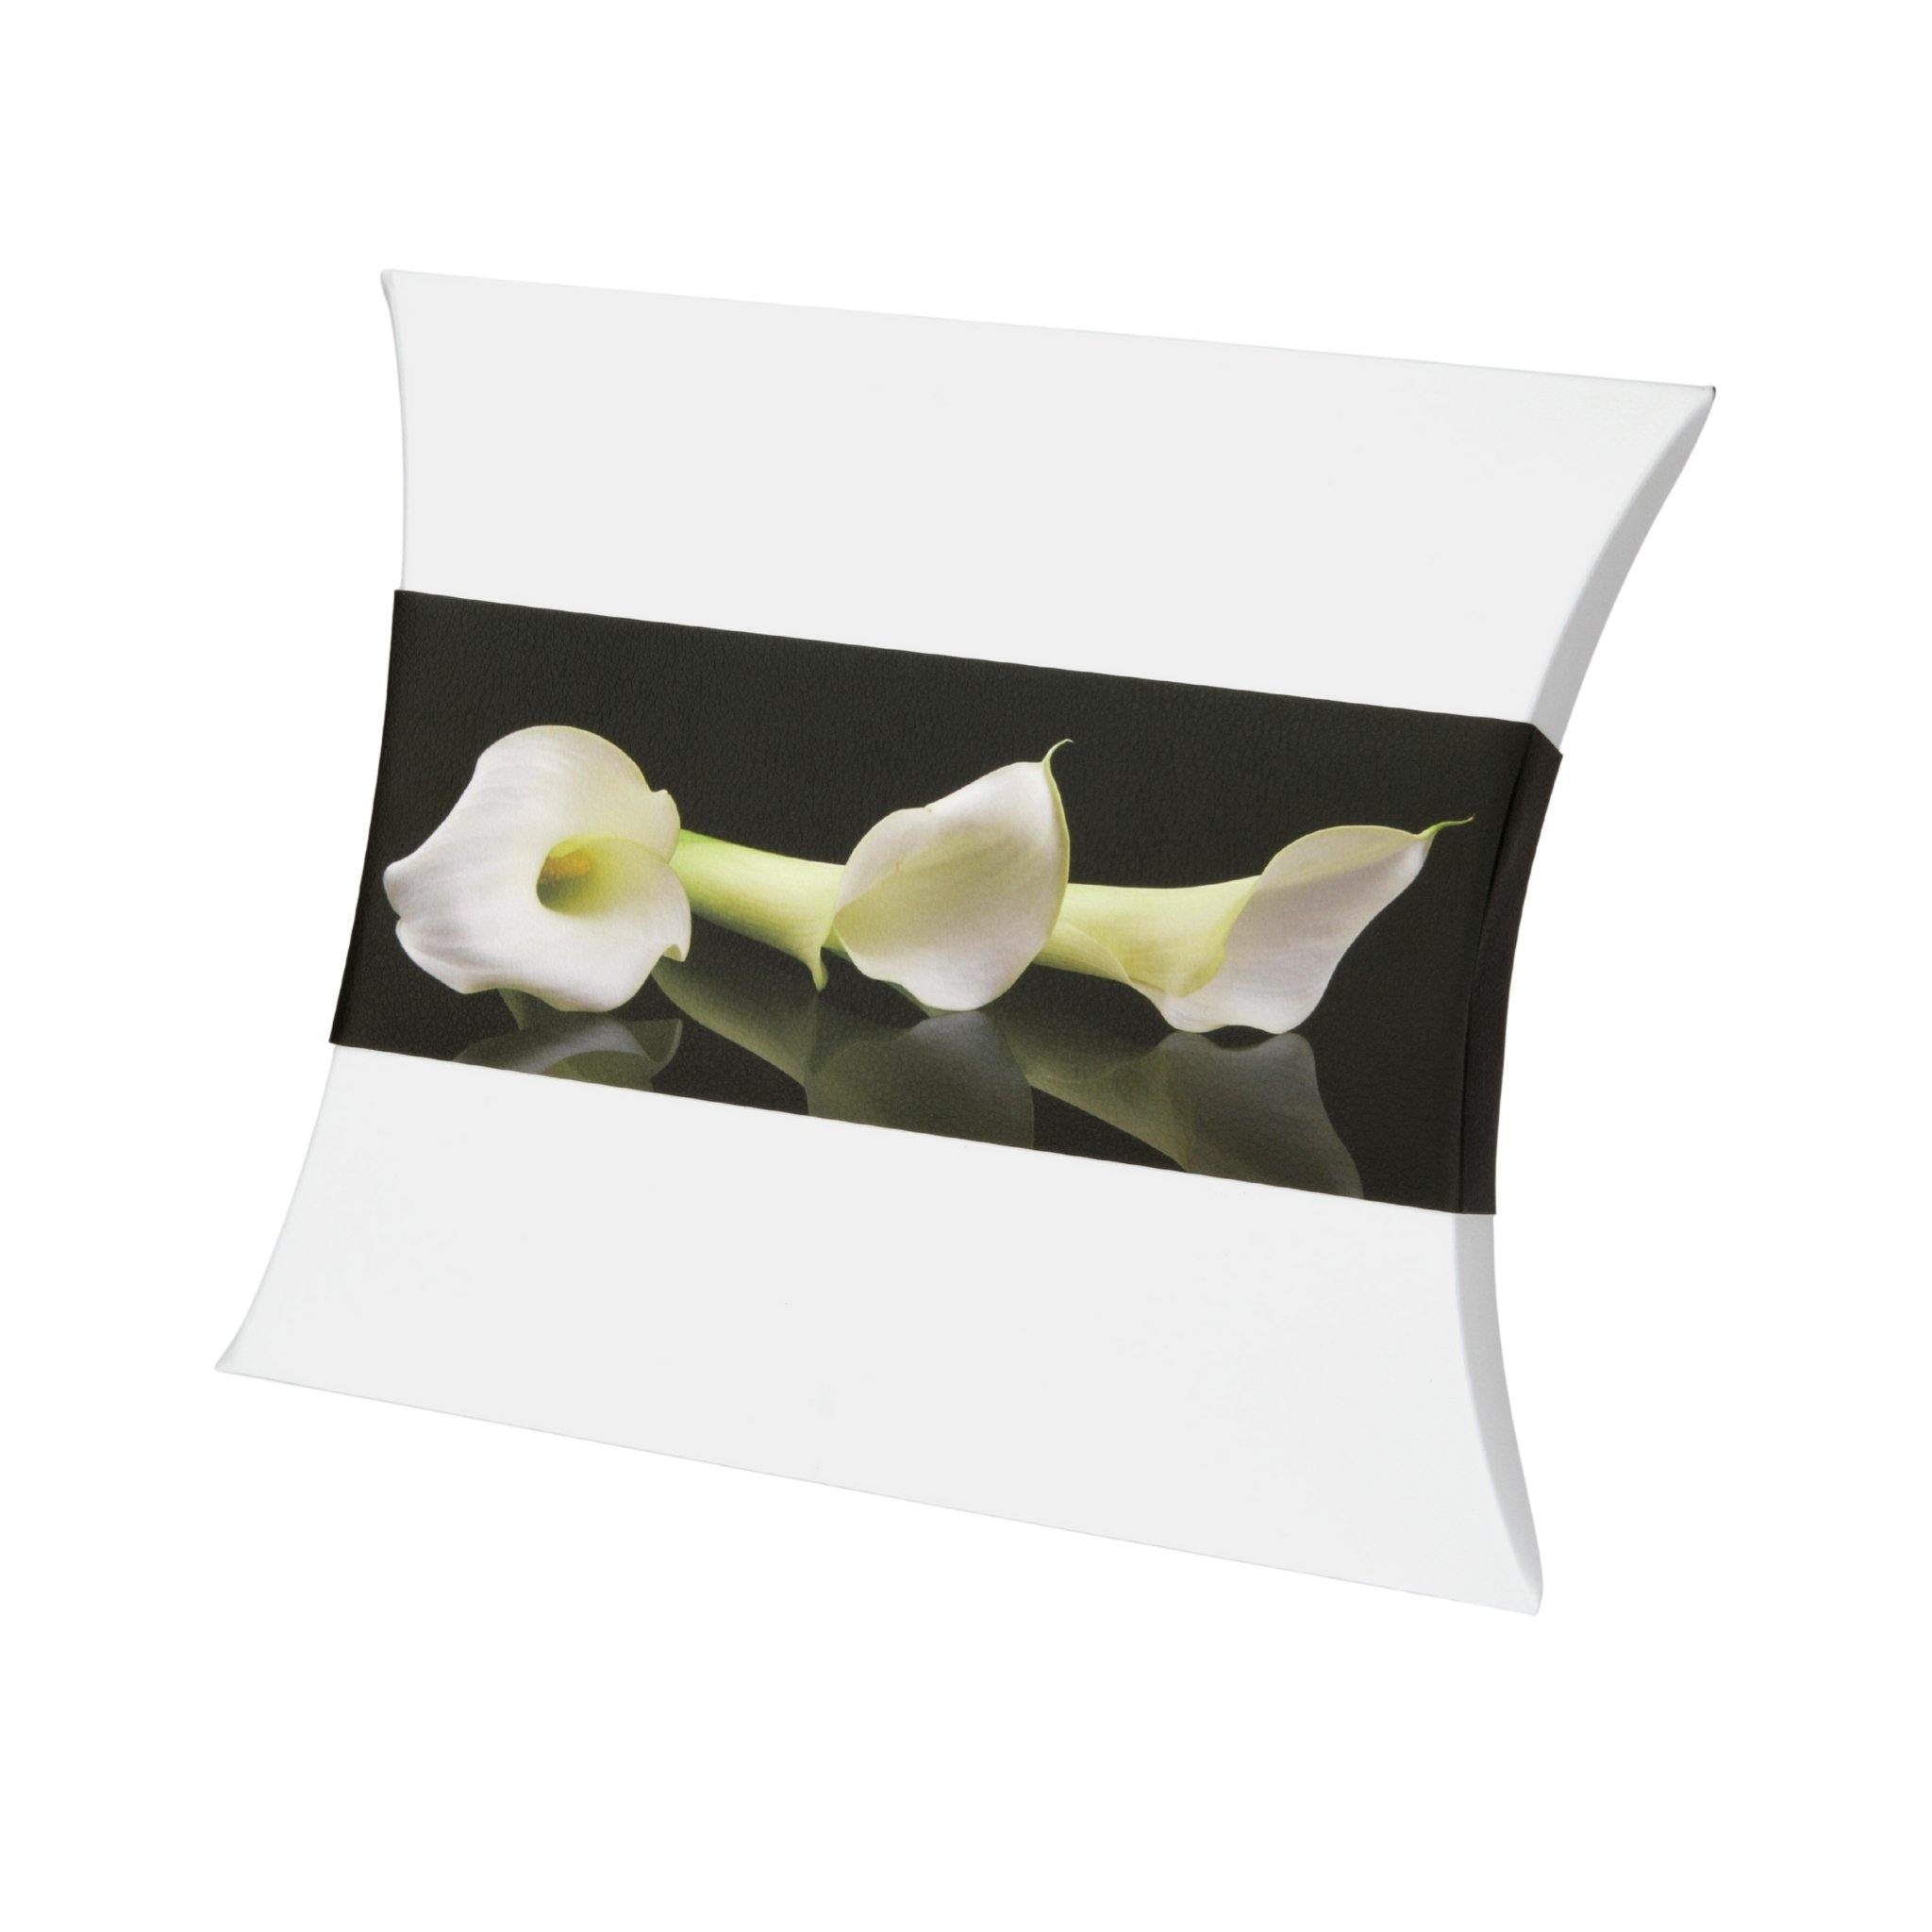 Serenity Water Burial Pillow Urn White Lily Urns UK